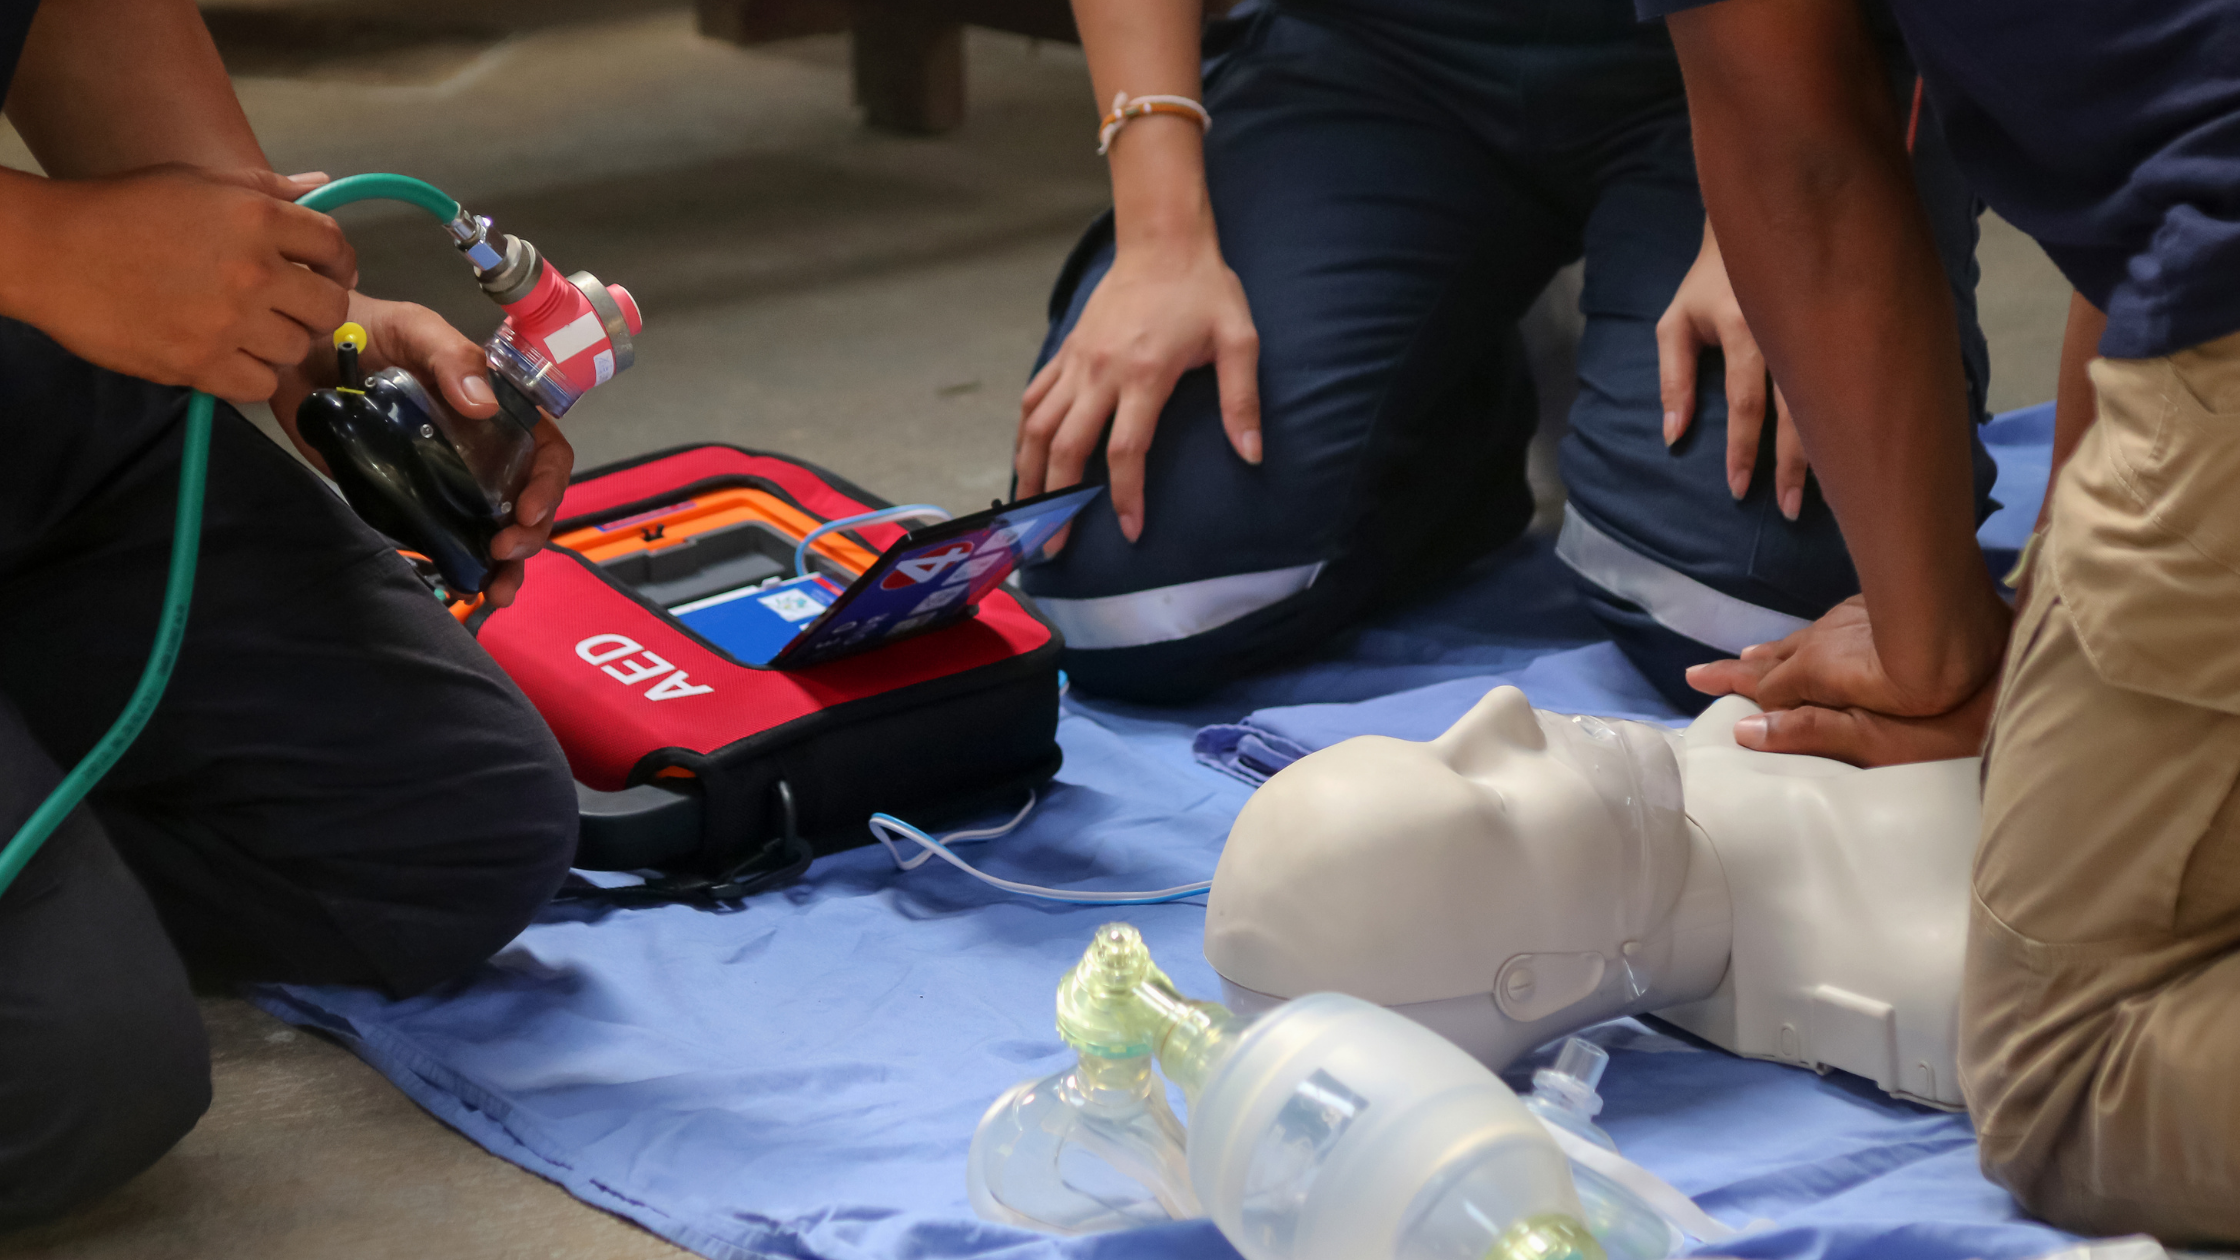 Victoria-tillicum Standard First Aid Course - CPR Level C (Blended)